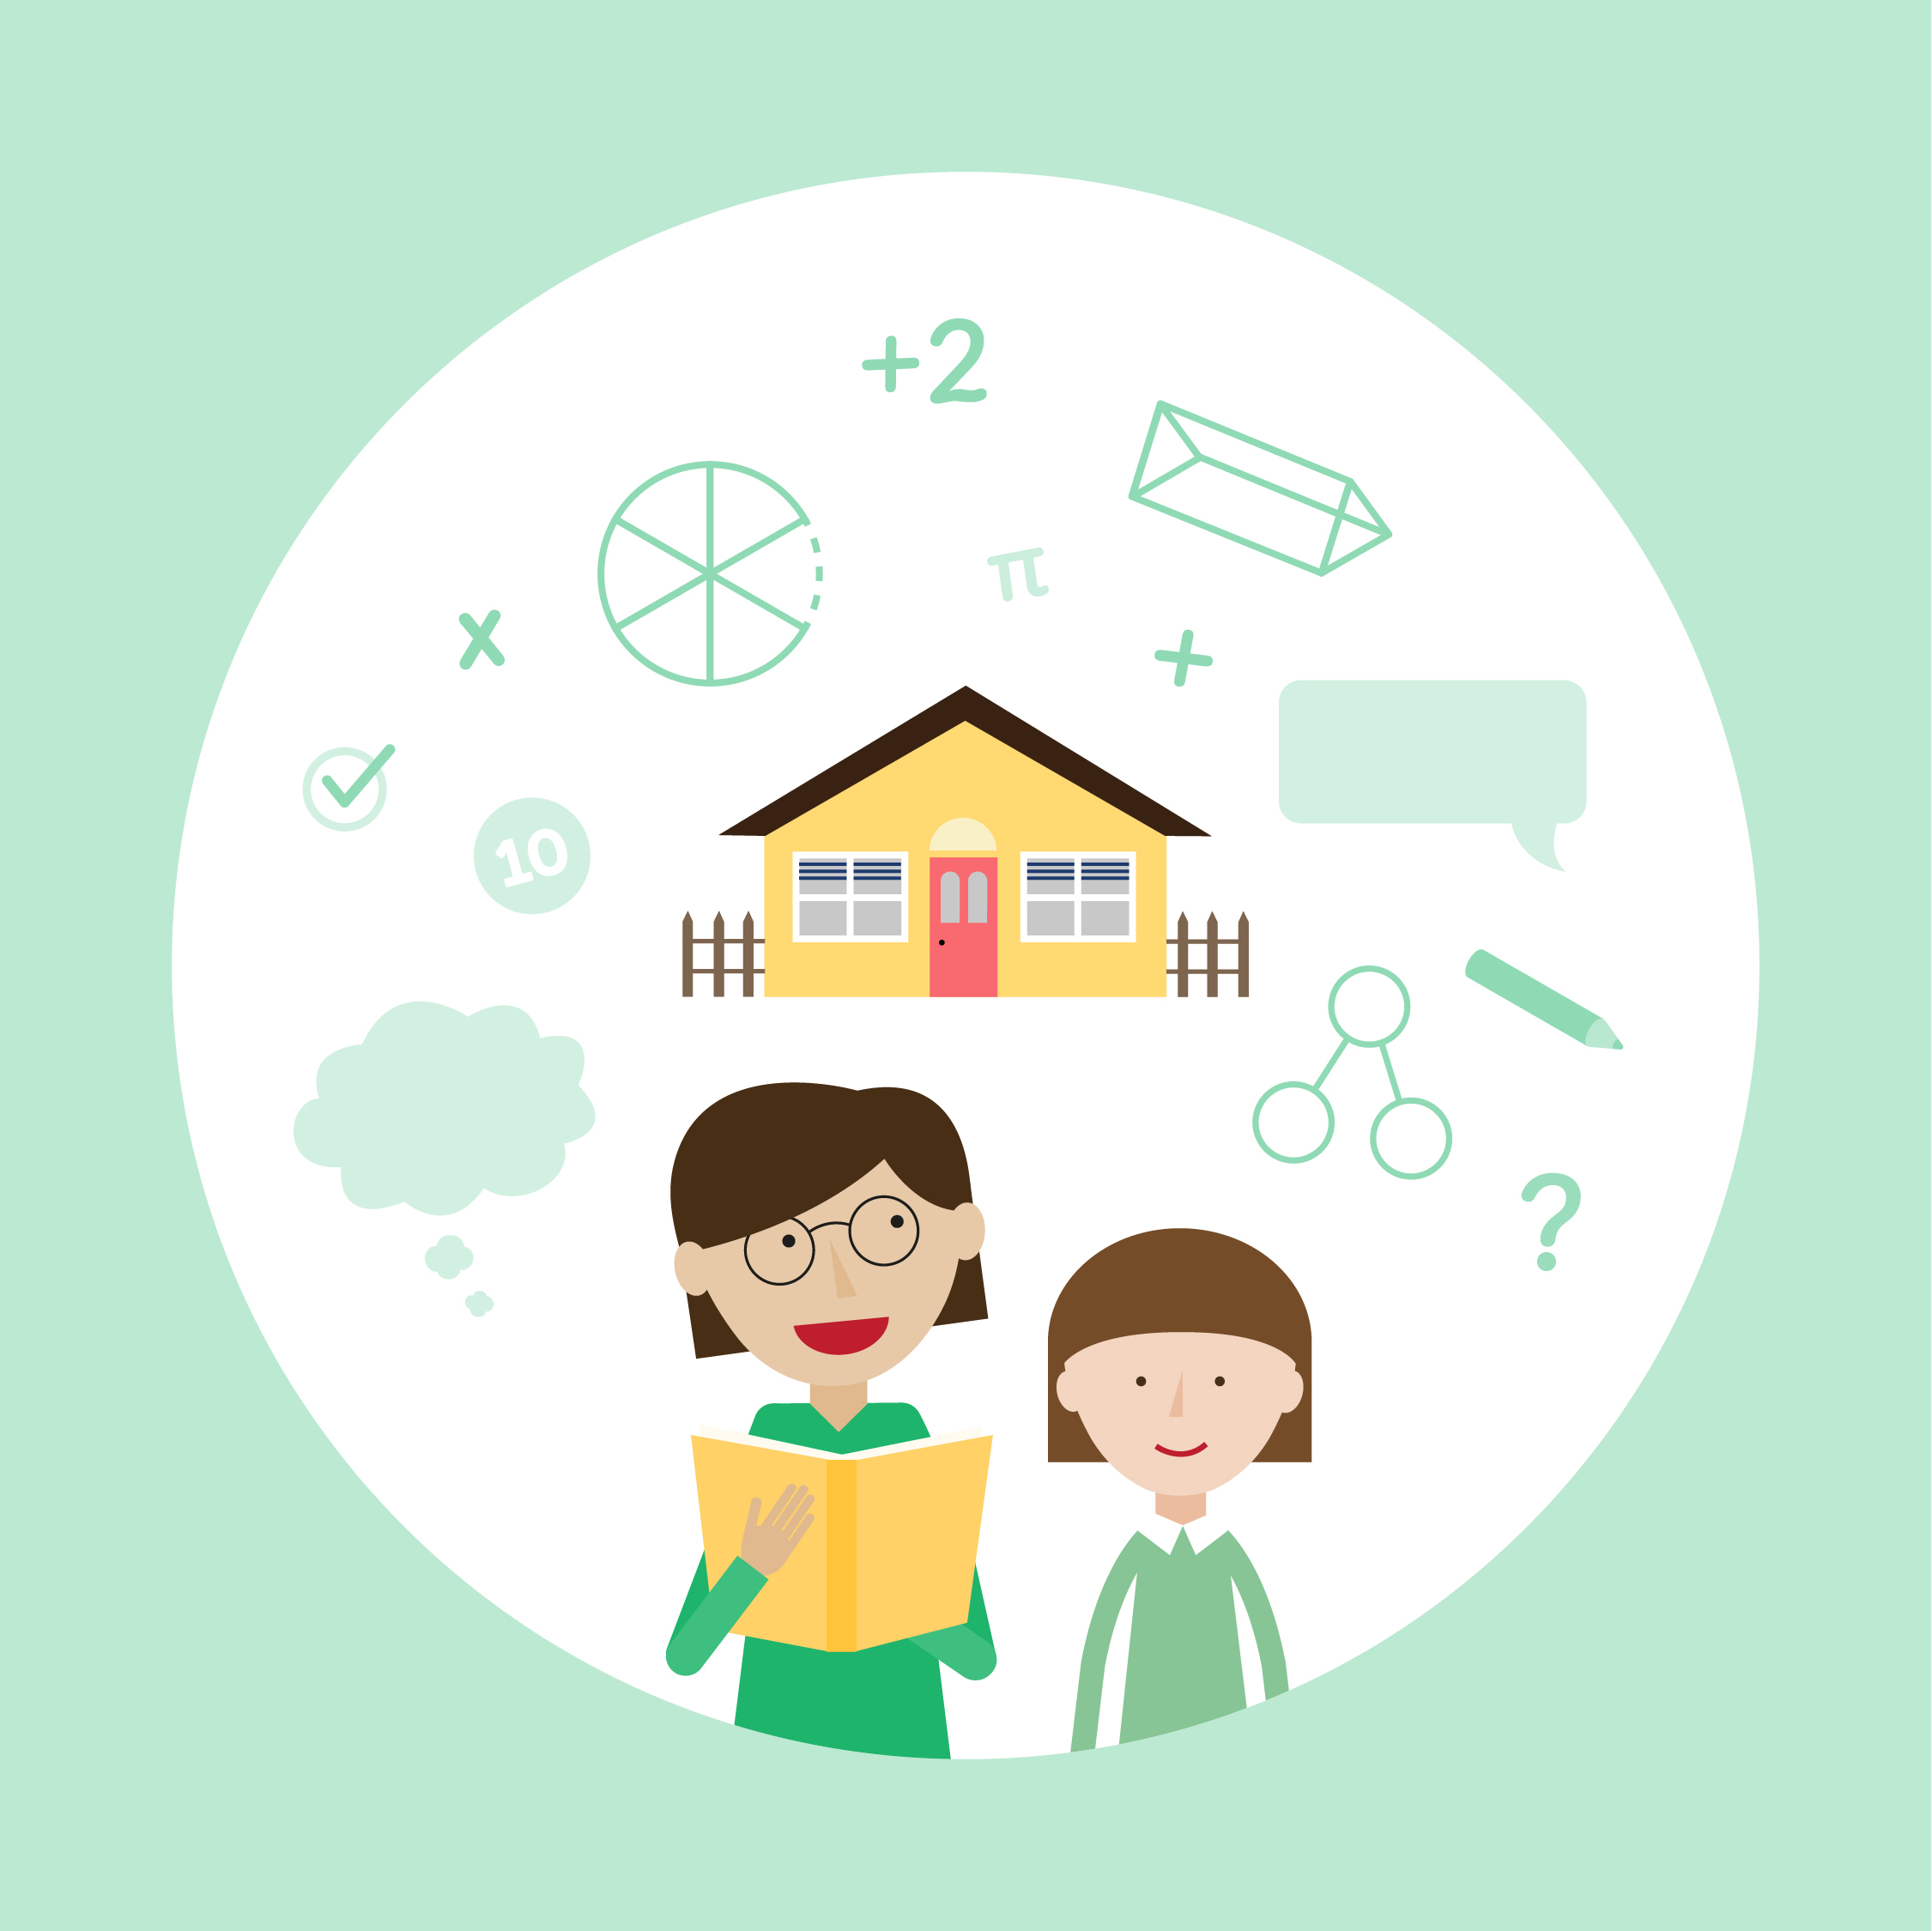 Maths Mastery program illustration of parent with child learning math with symbols and home